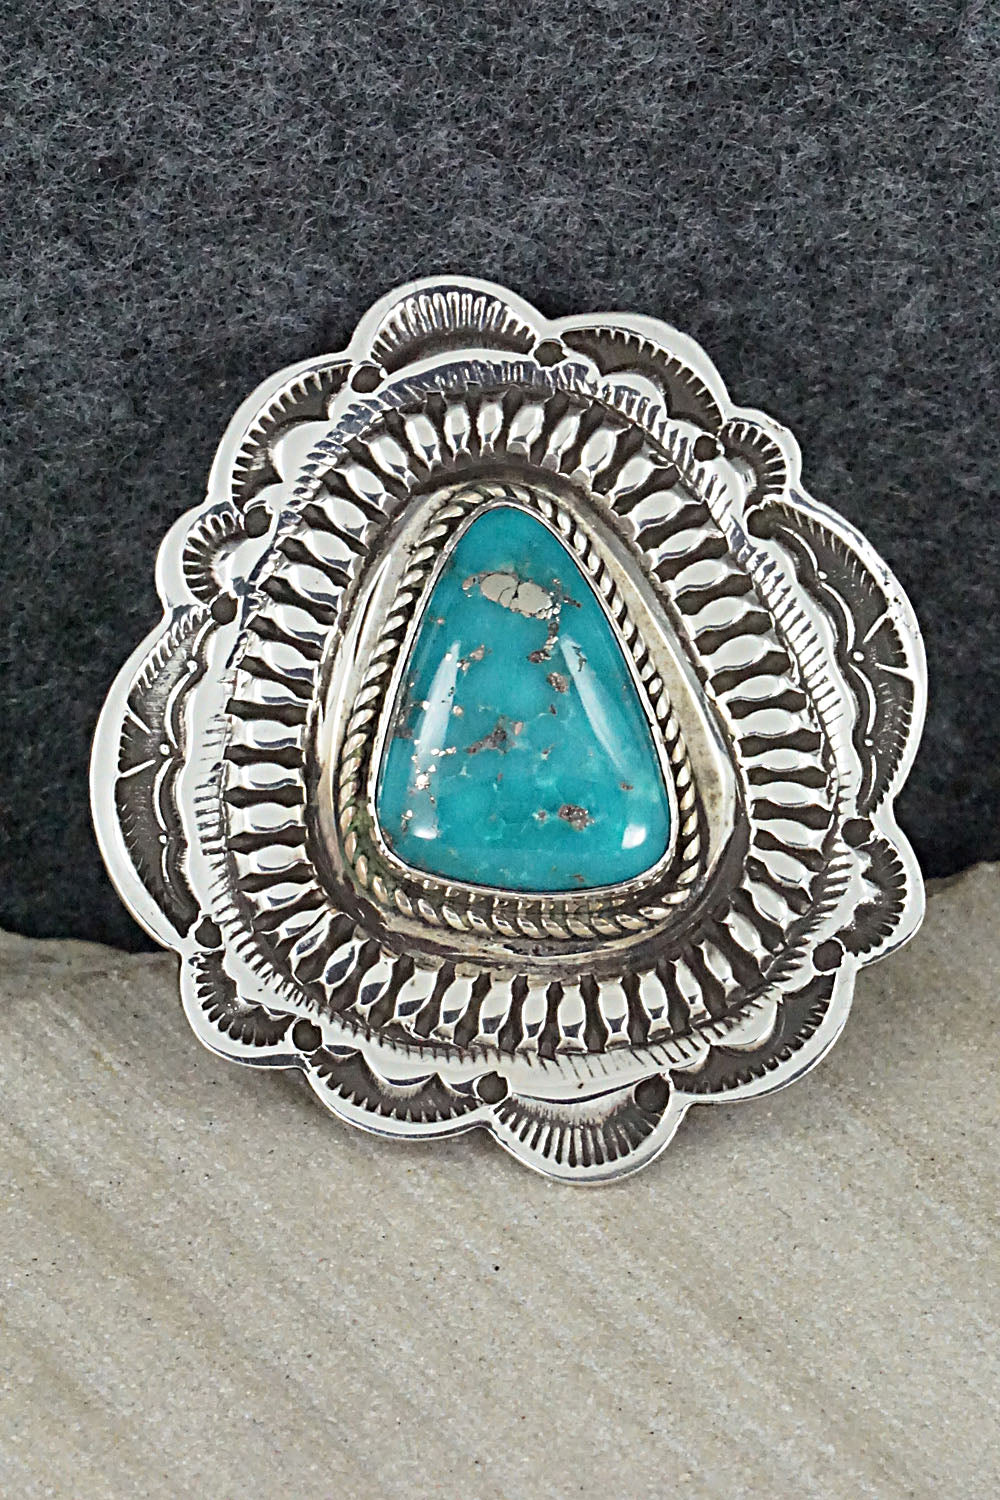 Turquoise & Sterling Silver Ring - Leonard Maloney - 6.5